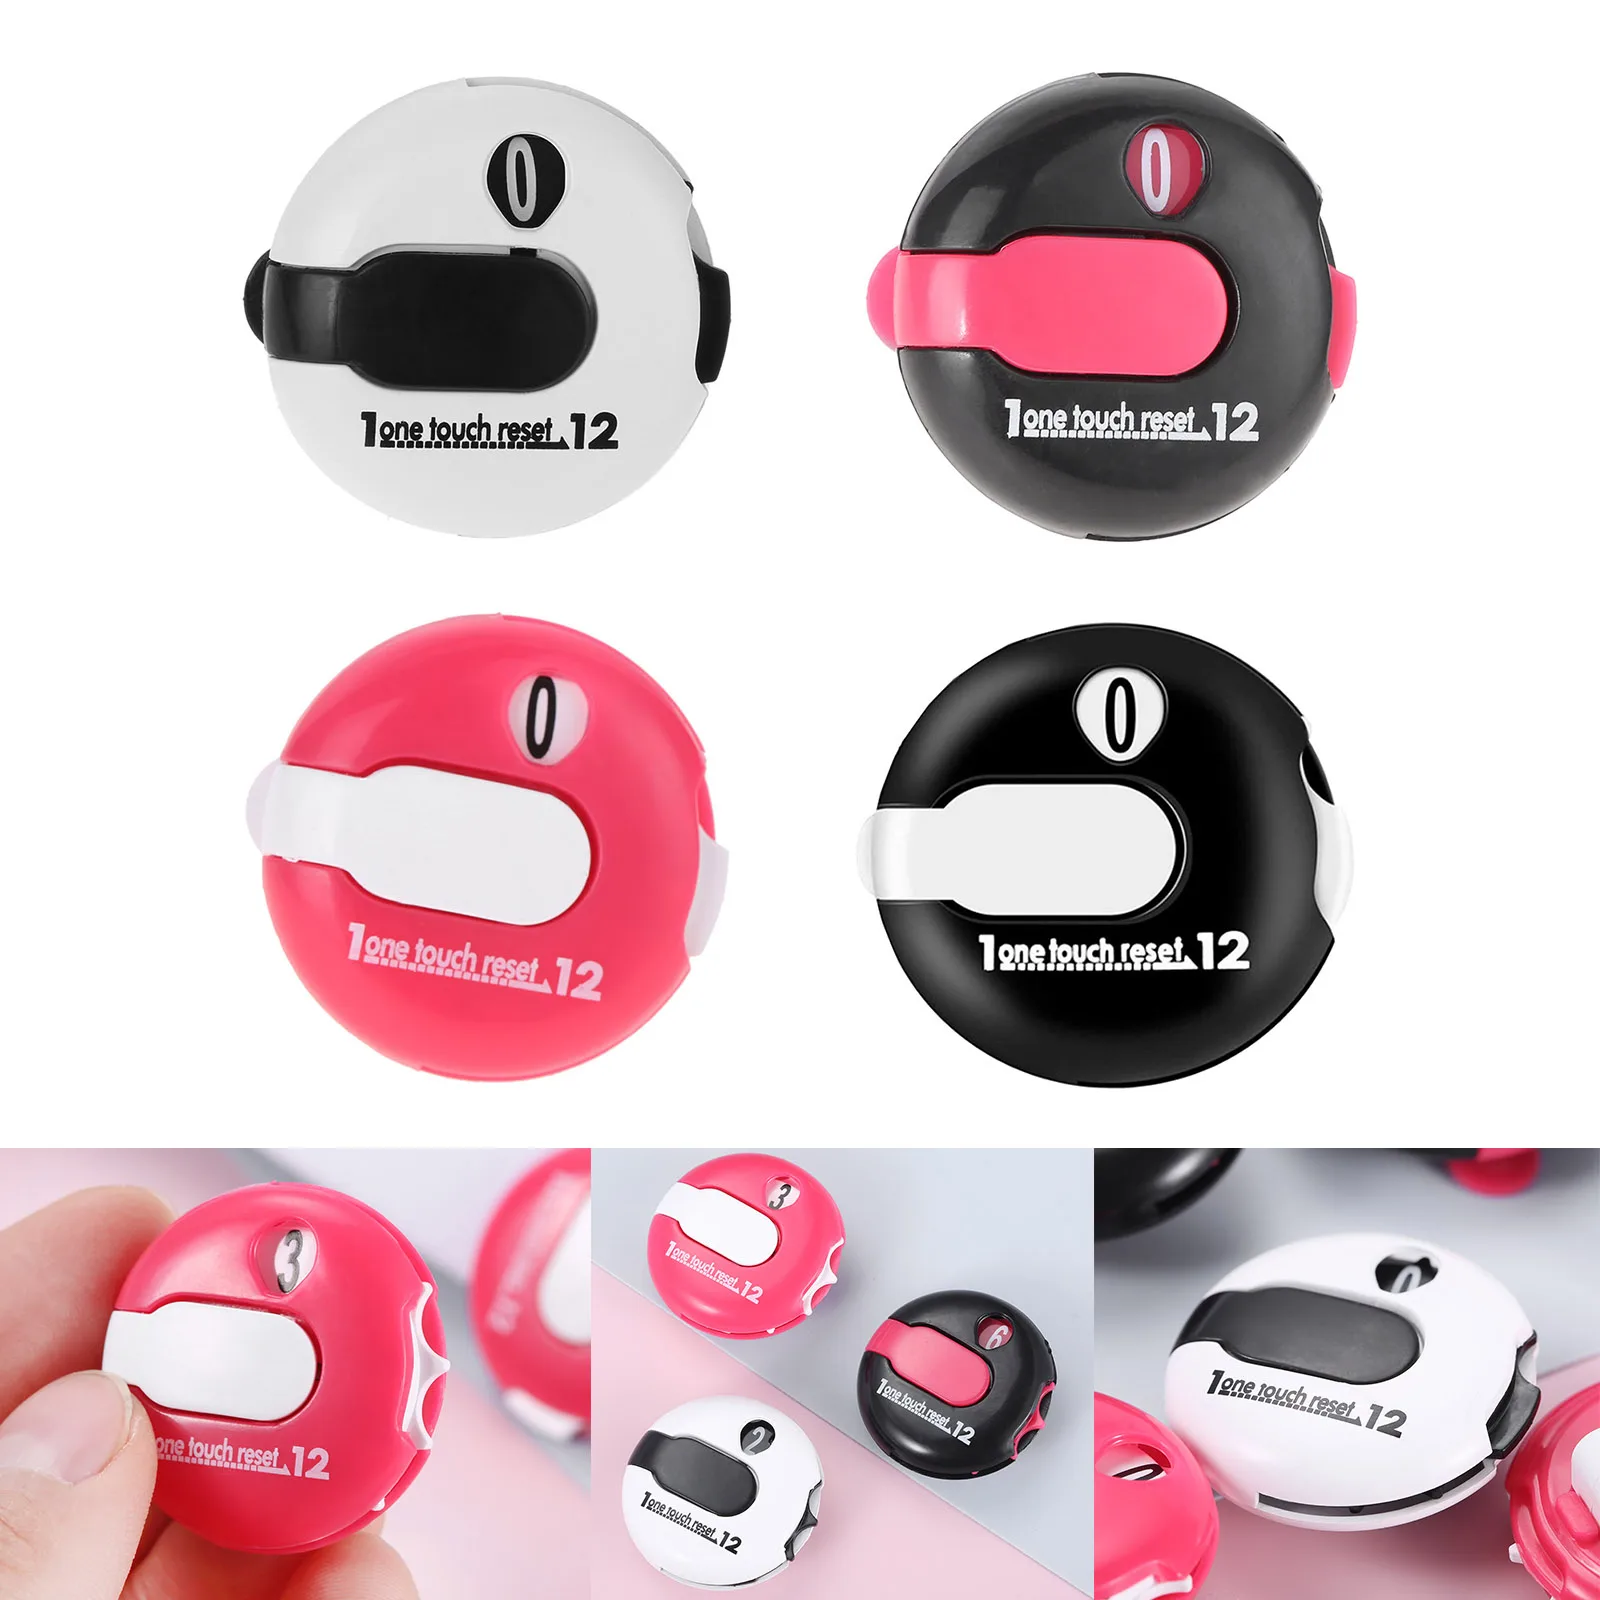 

1 Pc Golf Stroke Counter Diameter 3cm PP White/Black/Pink/White&Black Mini Size One Touch Reset with Clip Outdoor Sports Supply